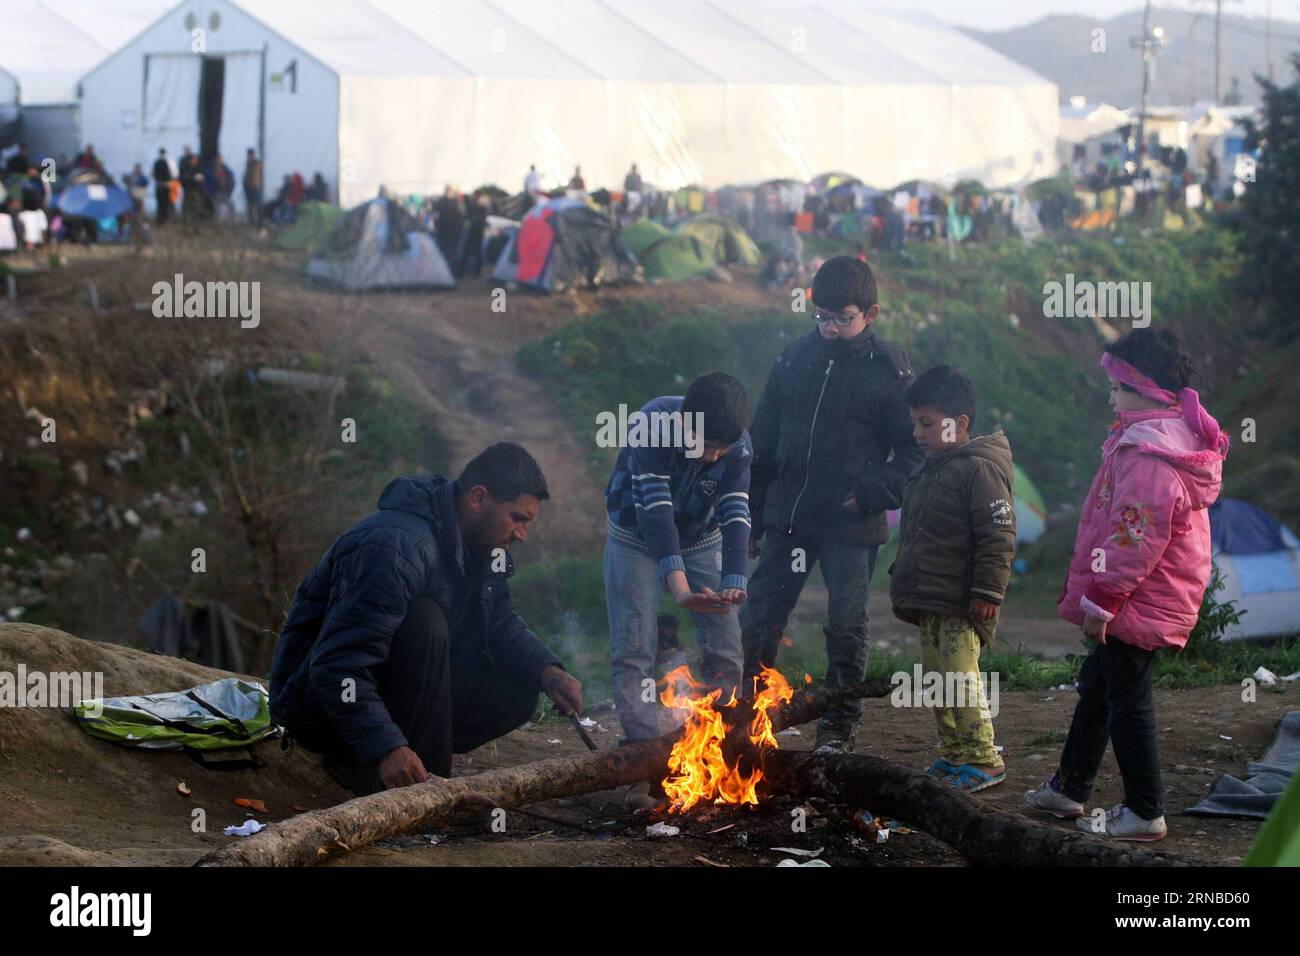 (160301) -- ATHENS, Mar. 1, 2016 -- Refugees wait to cross the border between Greece and Former Yugoslav Republic of Macedonia (FYROM) in Idomeni, Greece, March 1, 2016. The situation in Idomeni is becoming dramatic as more than 9,000 refugees are camped by the borderline, hoping to cross and carry on their journeys. ) GREECE-IDOMENI-REFUGEES MariosxLolos PUBLICATIONxNOTxINxCHN   Athens Mar 1 2016 Refugees Wait to Cross The Border between Greece and Former Yugoslav Republic of Macedonia FYROM in Idomeni Greece March 1 2016 The Situation in Idomeni IS Becoming Dramatic As More than 9 000 Refuge Stock Photo